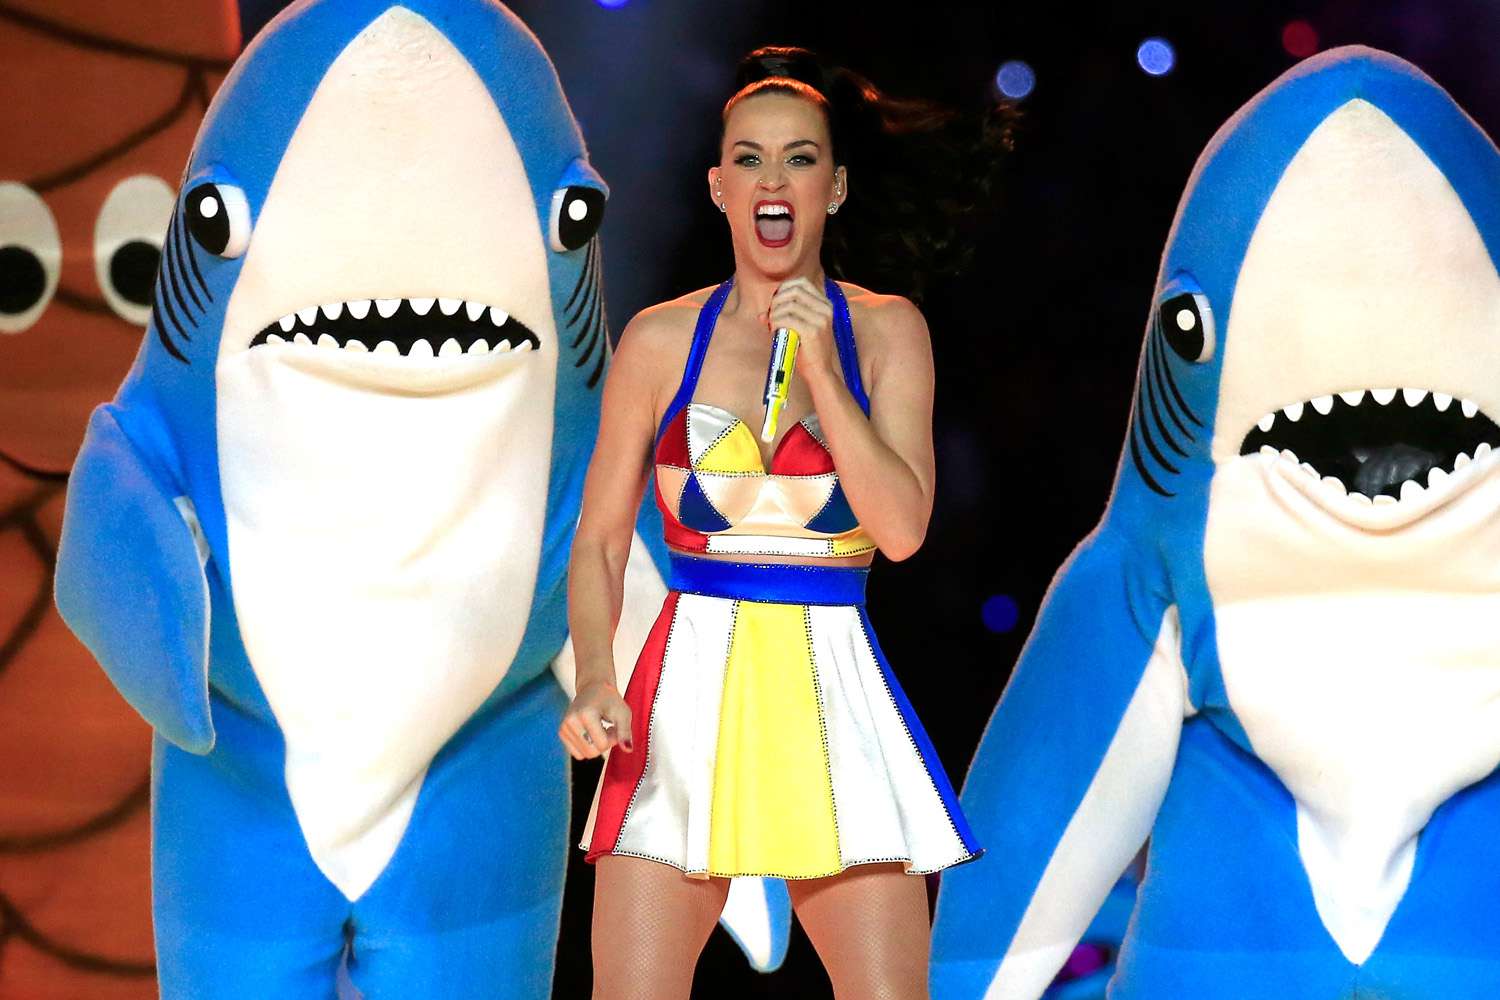 Katy Perry performs with dancers during the Pepsi Super Bowl XLIX Halftime Show